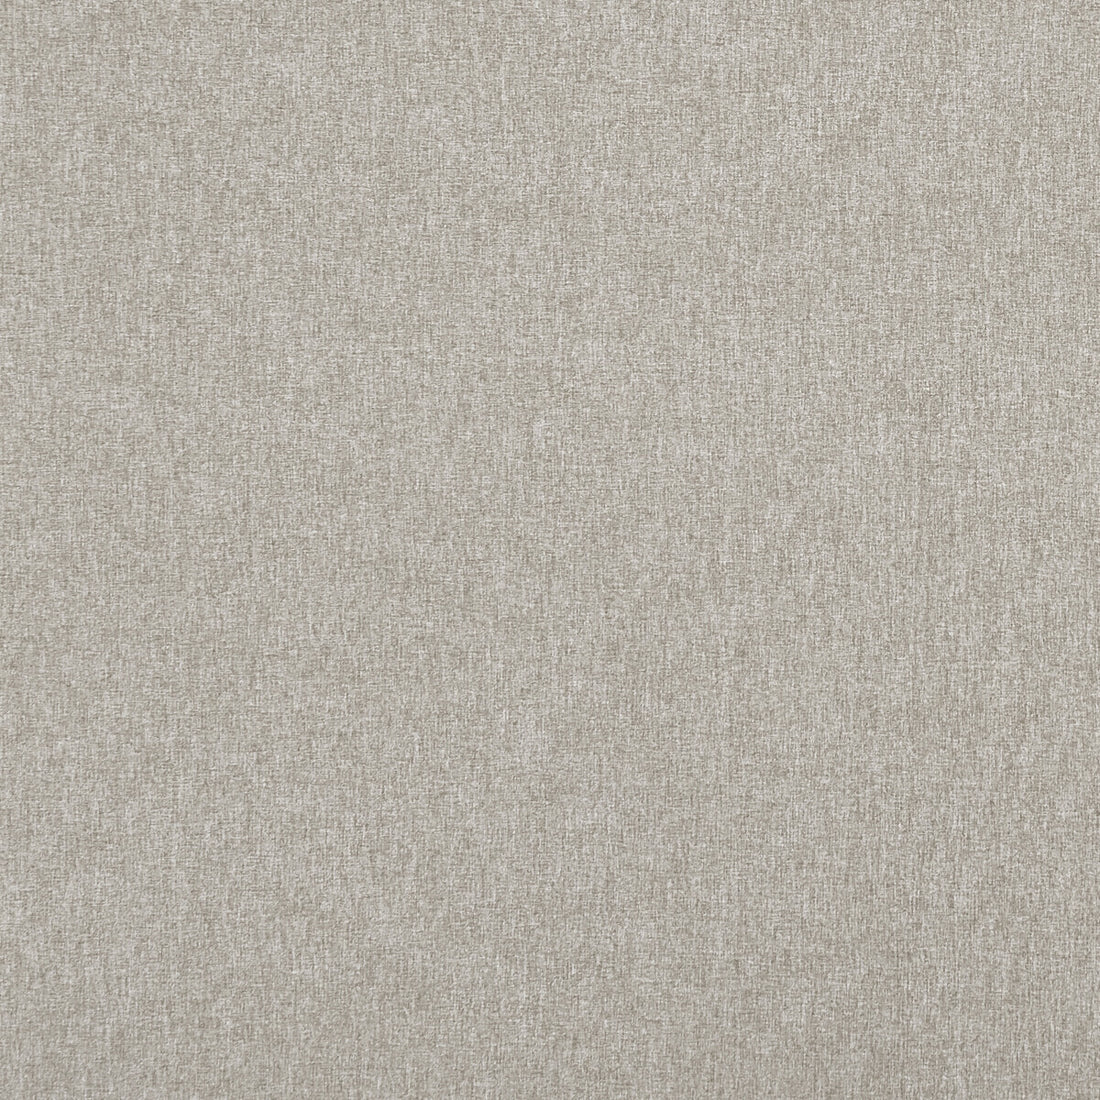 Highlander fabric in gunmetal color - pattern F0848/48.CAC.0 - by Clarke And Clarke in the Clarke &amp; Clarke Highlander 2 collection